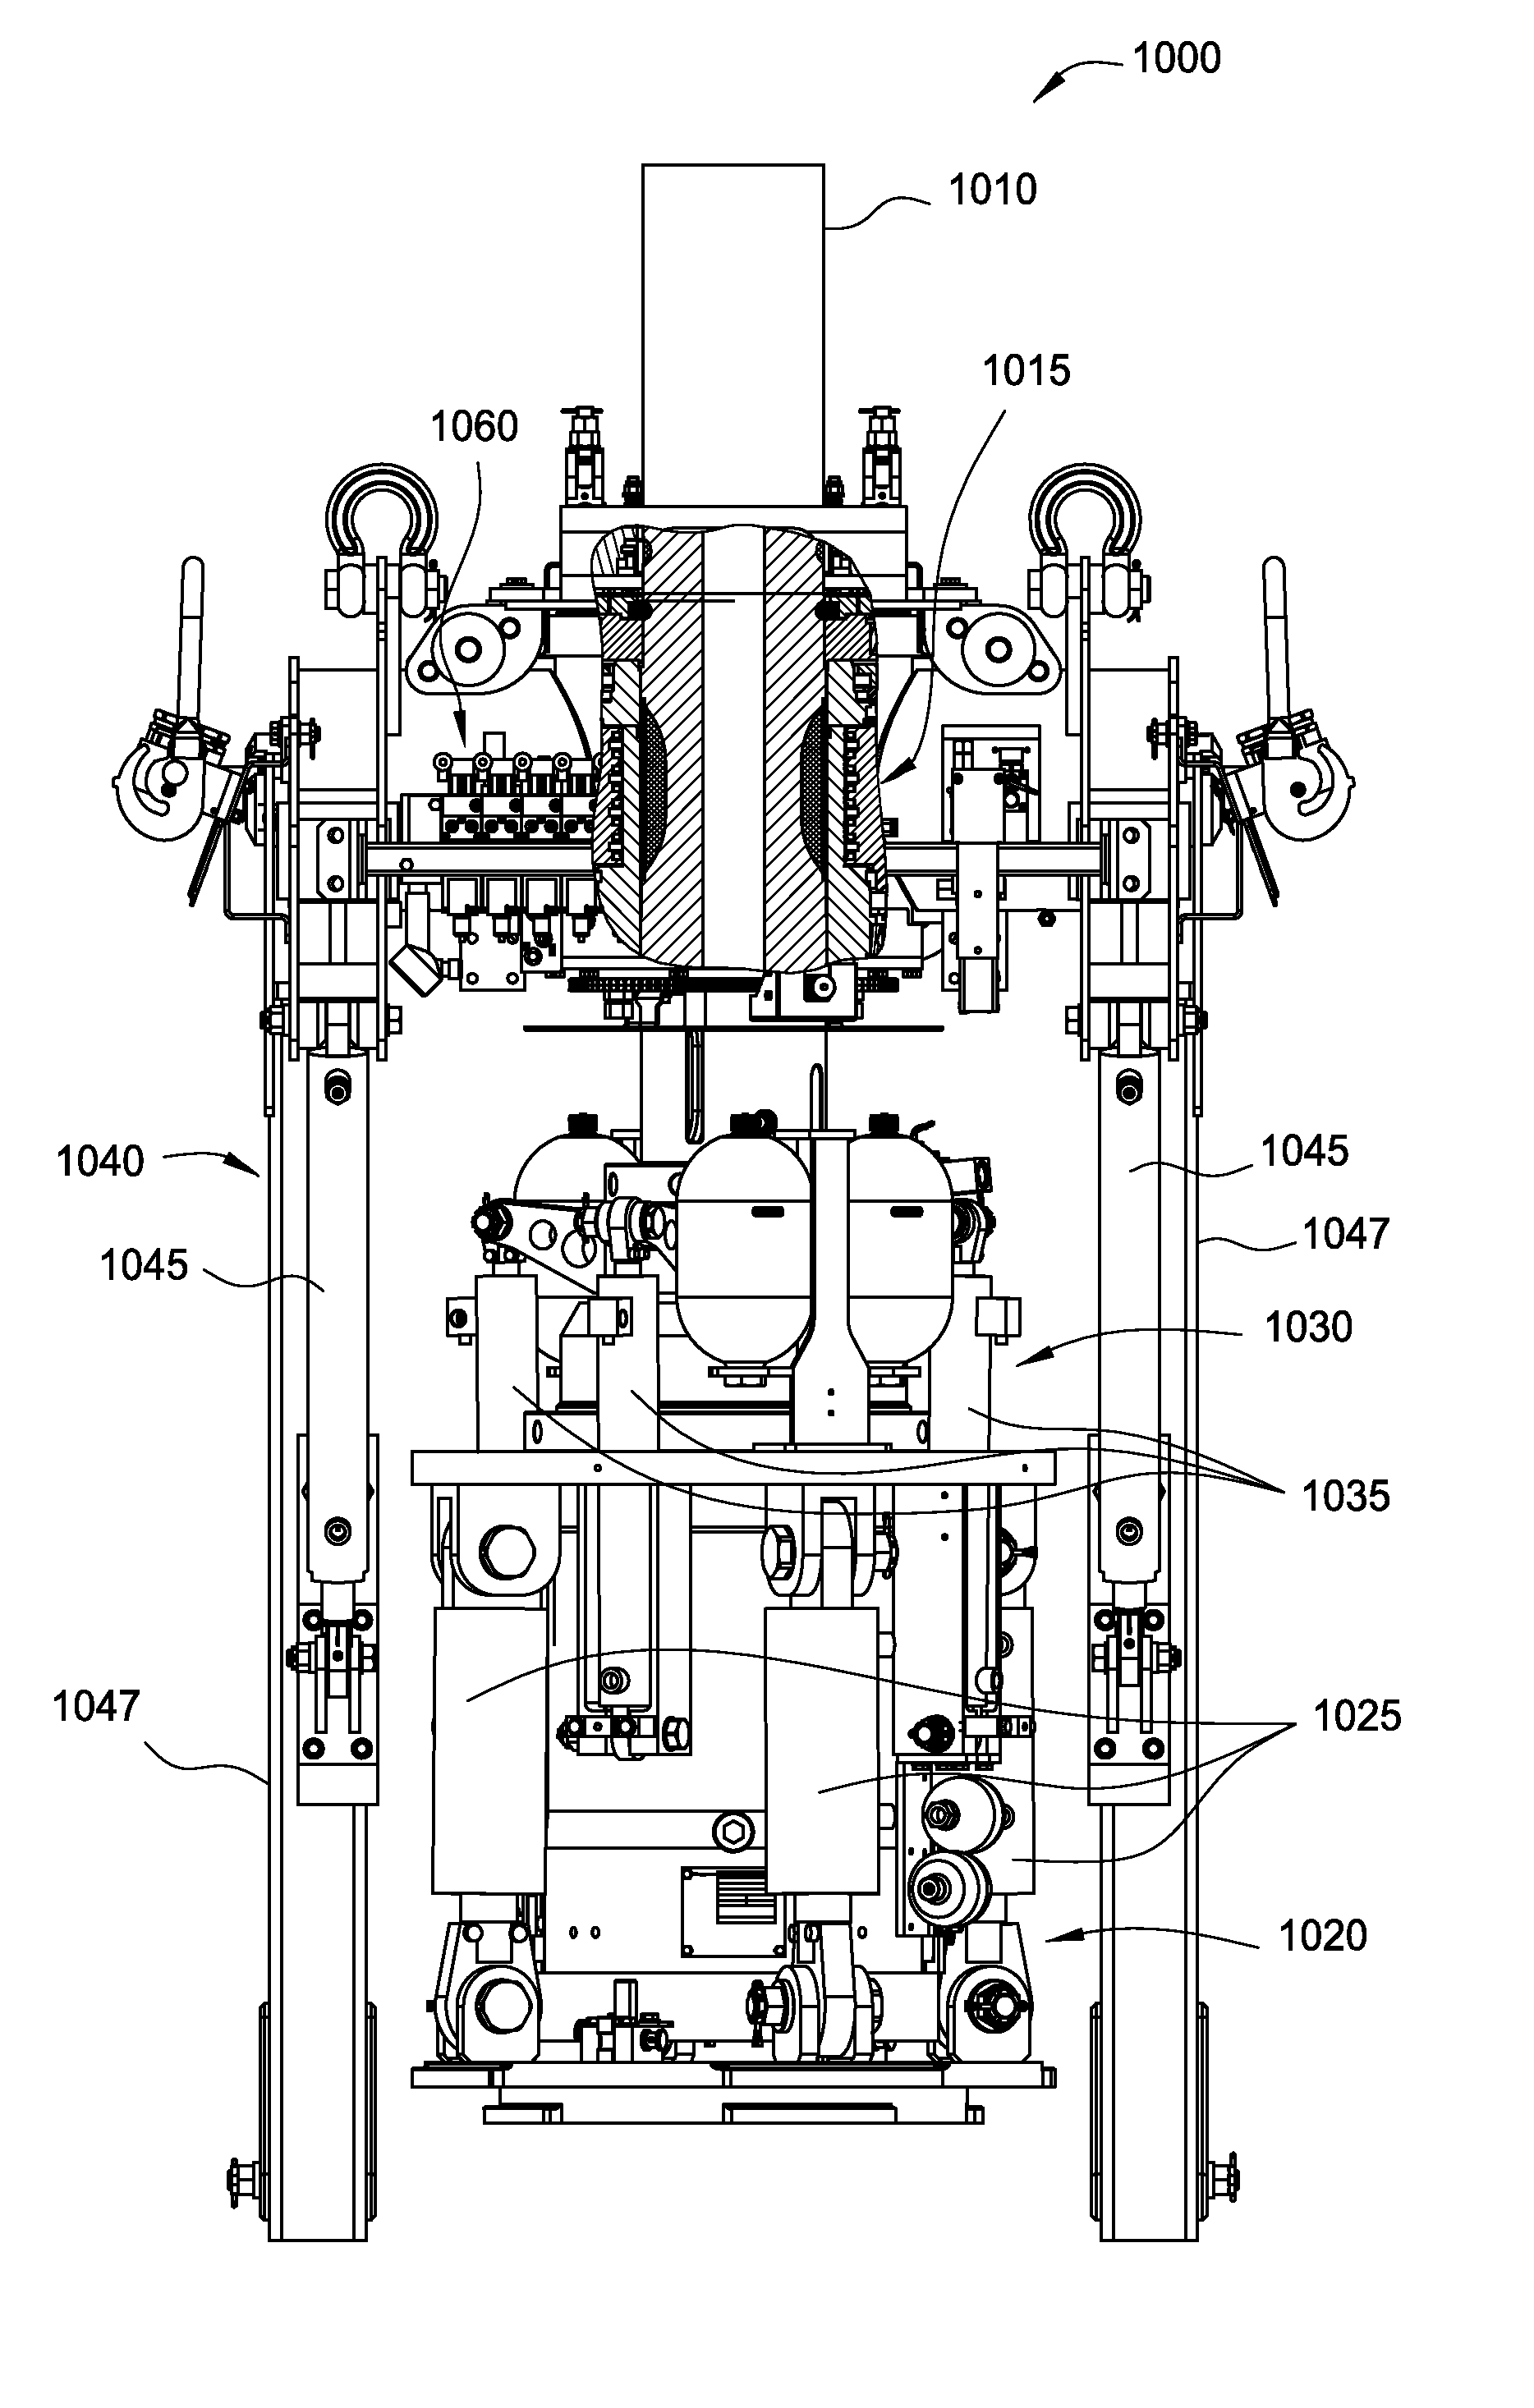 Electronic control system for a tubular handling tool